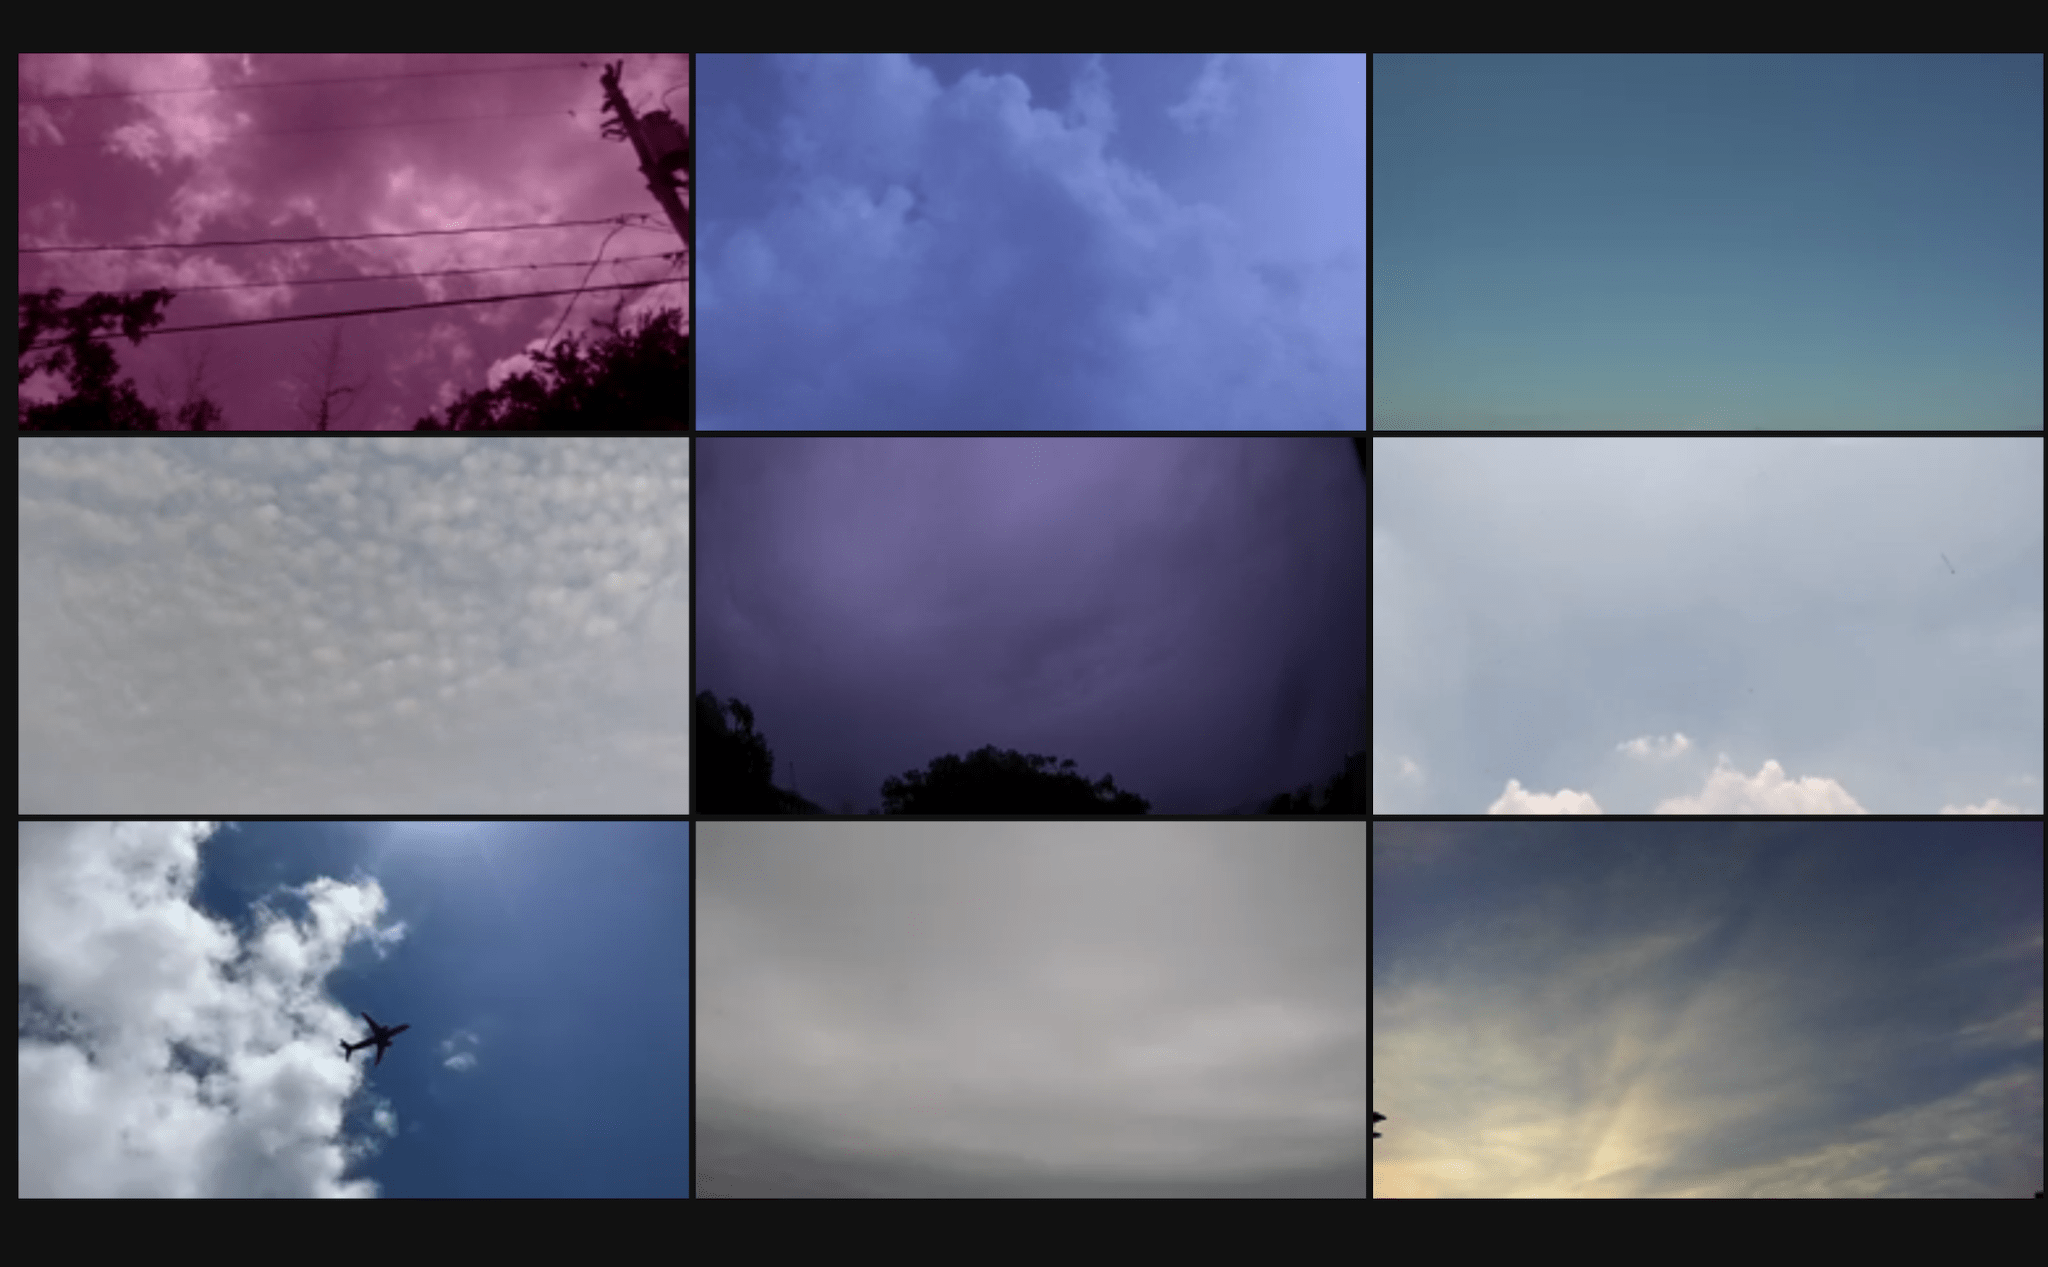 A screenshot of nine rectangular video screens, each of which displays an image of the sky. Two skies are purple and stormy, two skies are gray and overcast, and five skies are blue and sunny with varied patterns of clouds.